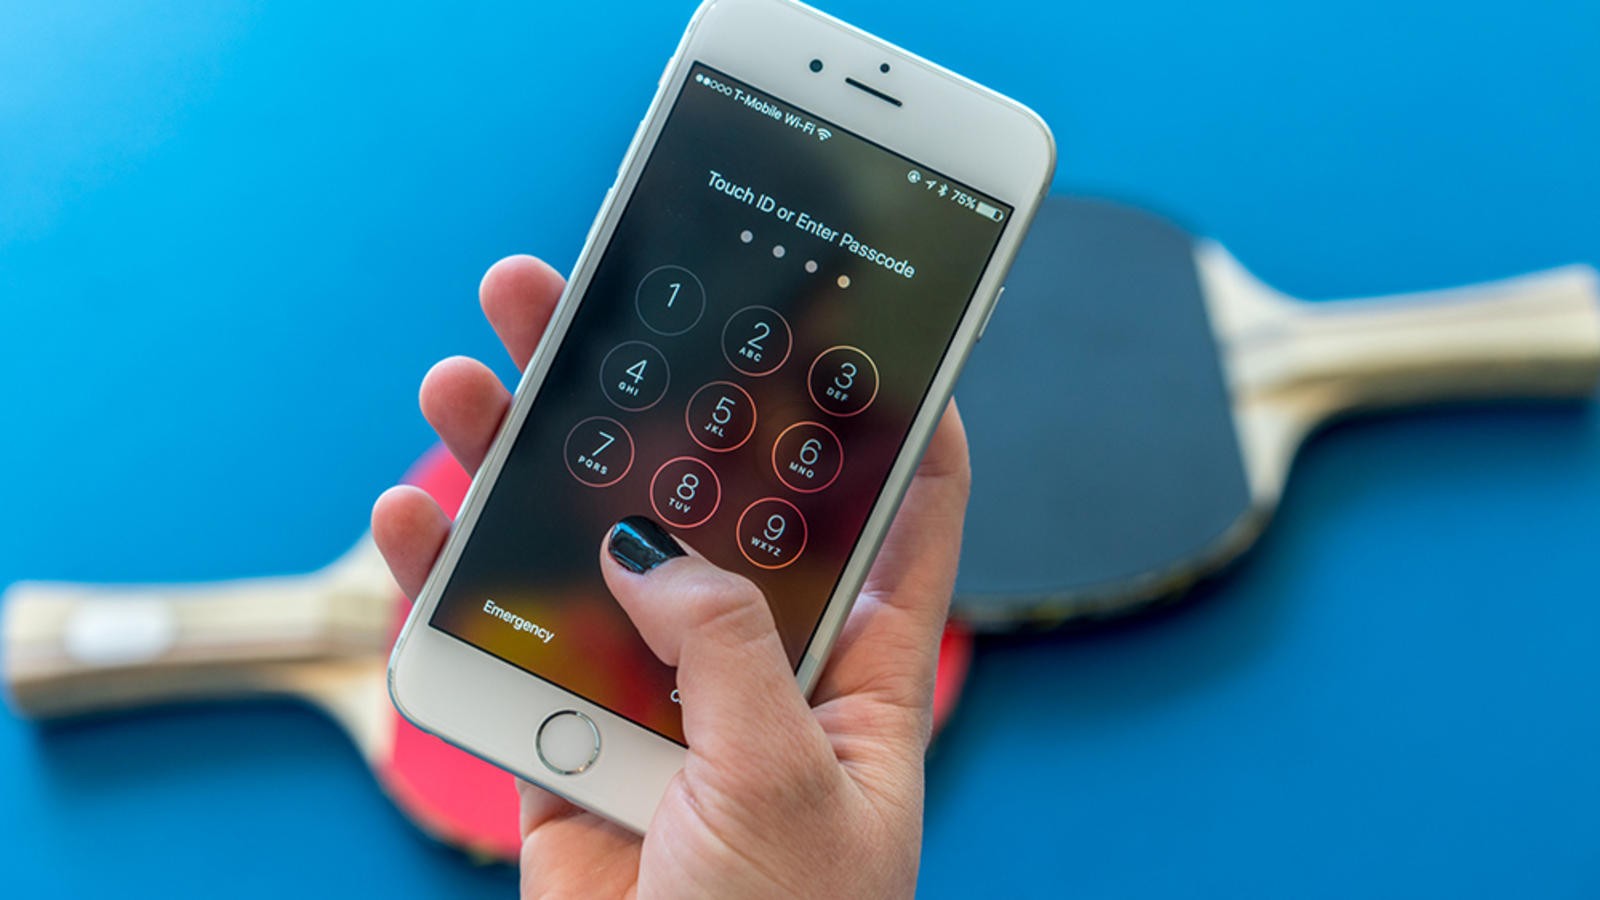 FBI Confirms Their Hack Method For iPhone Not Feasible With Higher Versions